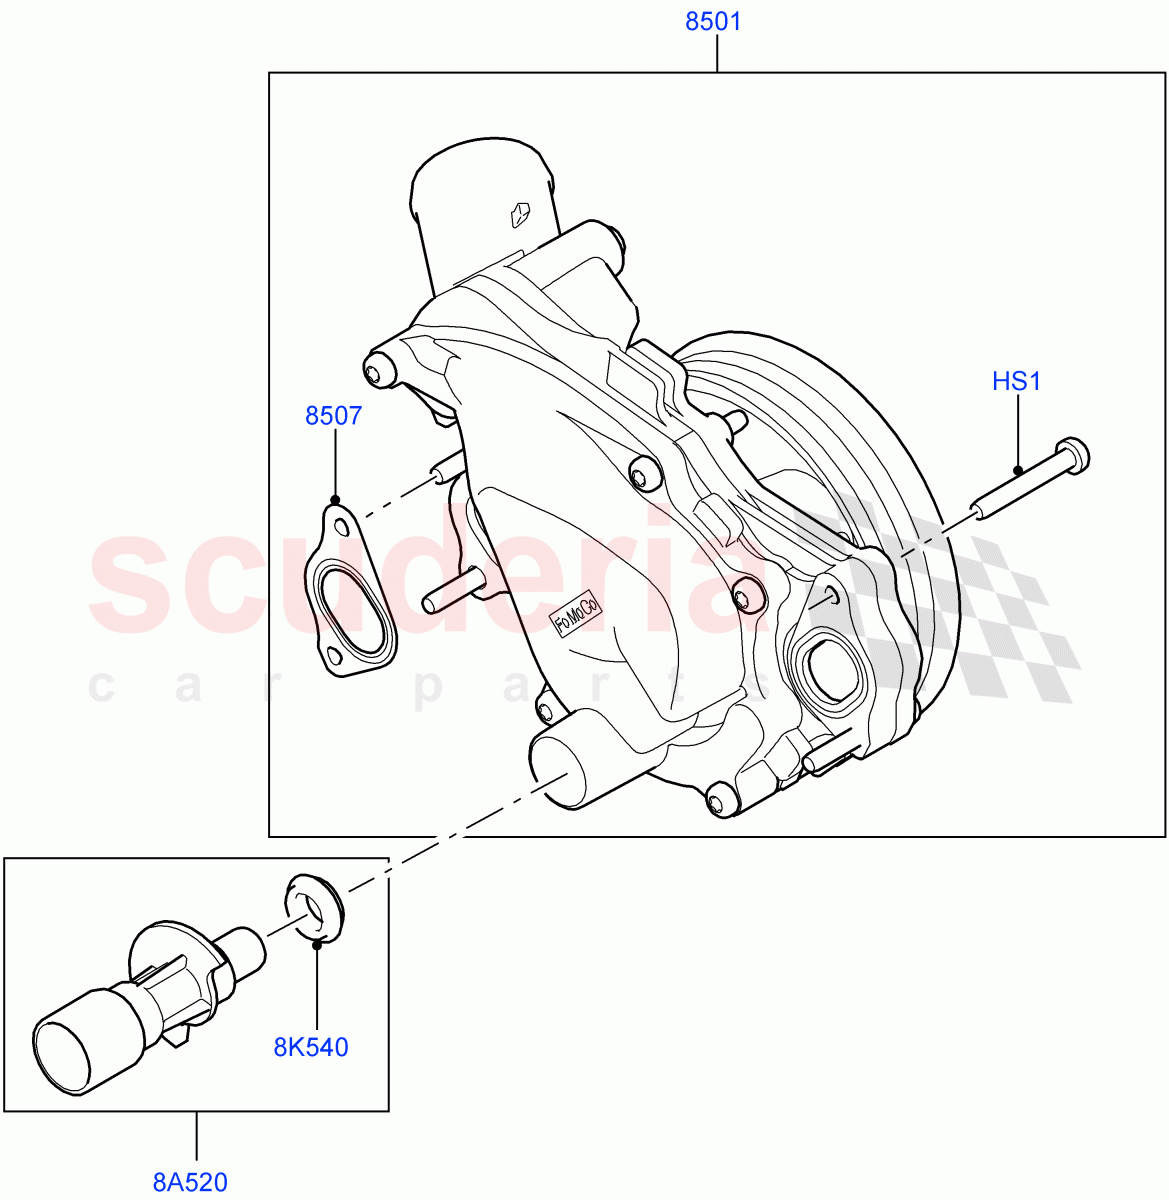 Water Pump(Solihull Plant Build, Main Unit)(3.0L DOHC GDI SC V6 PETROL)((V)FROMEA000001) of Land Rover Land Rover Discovery 5 (2017+) [3.0 DOHC GDI SC V6 Petrol]